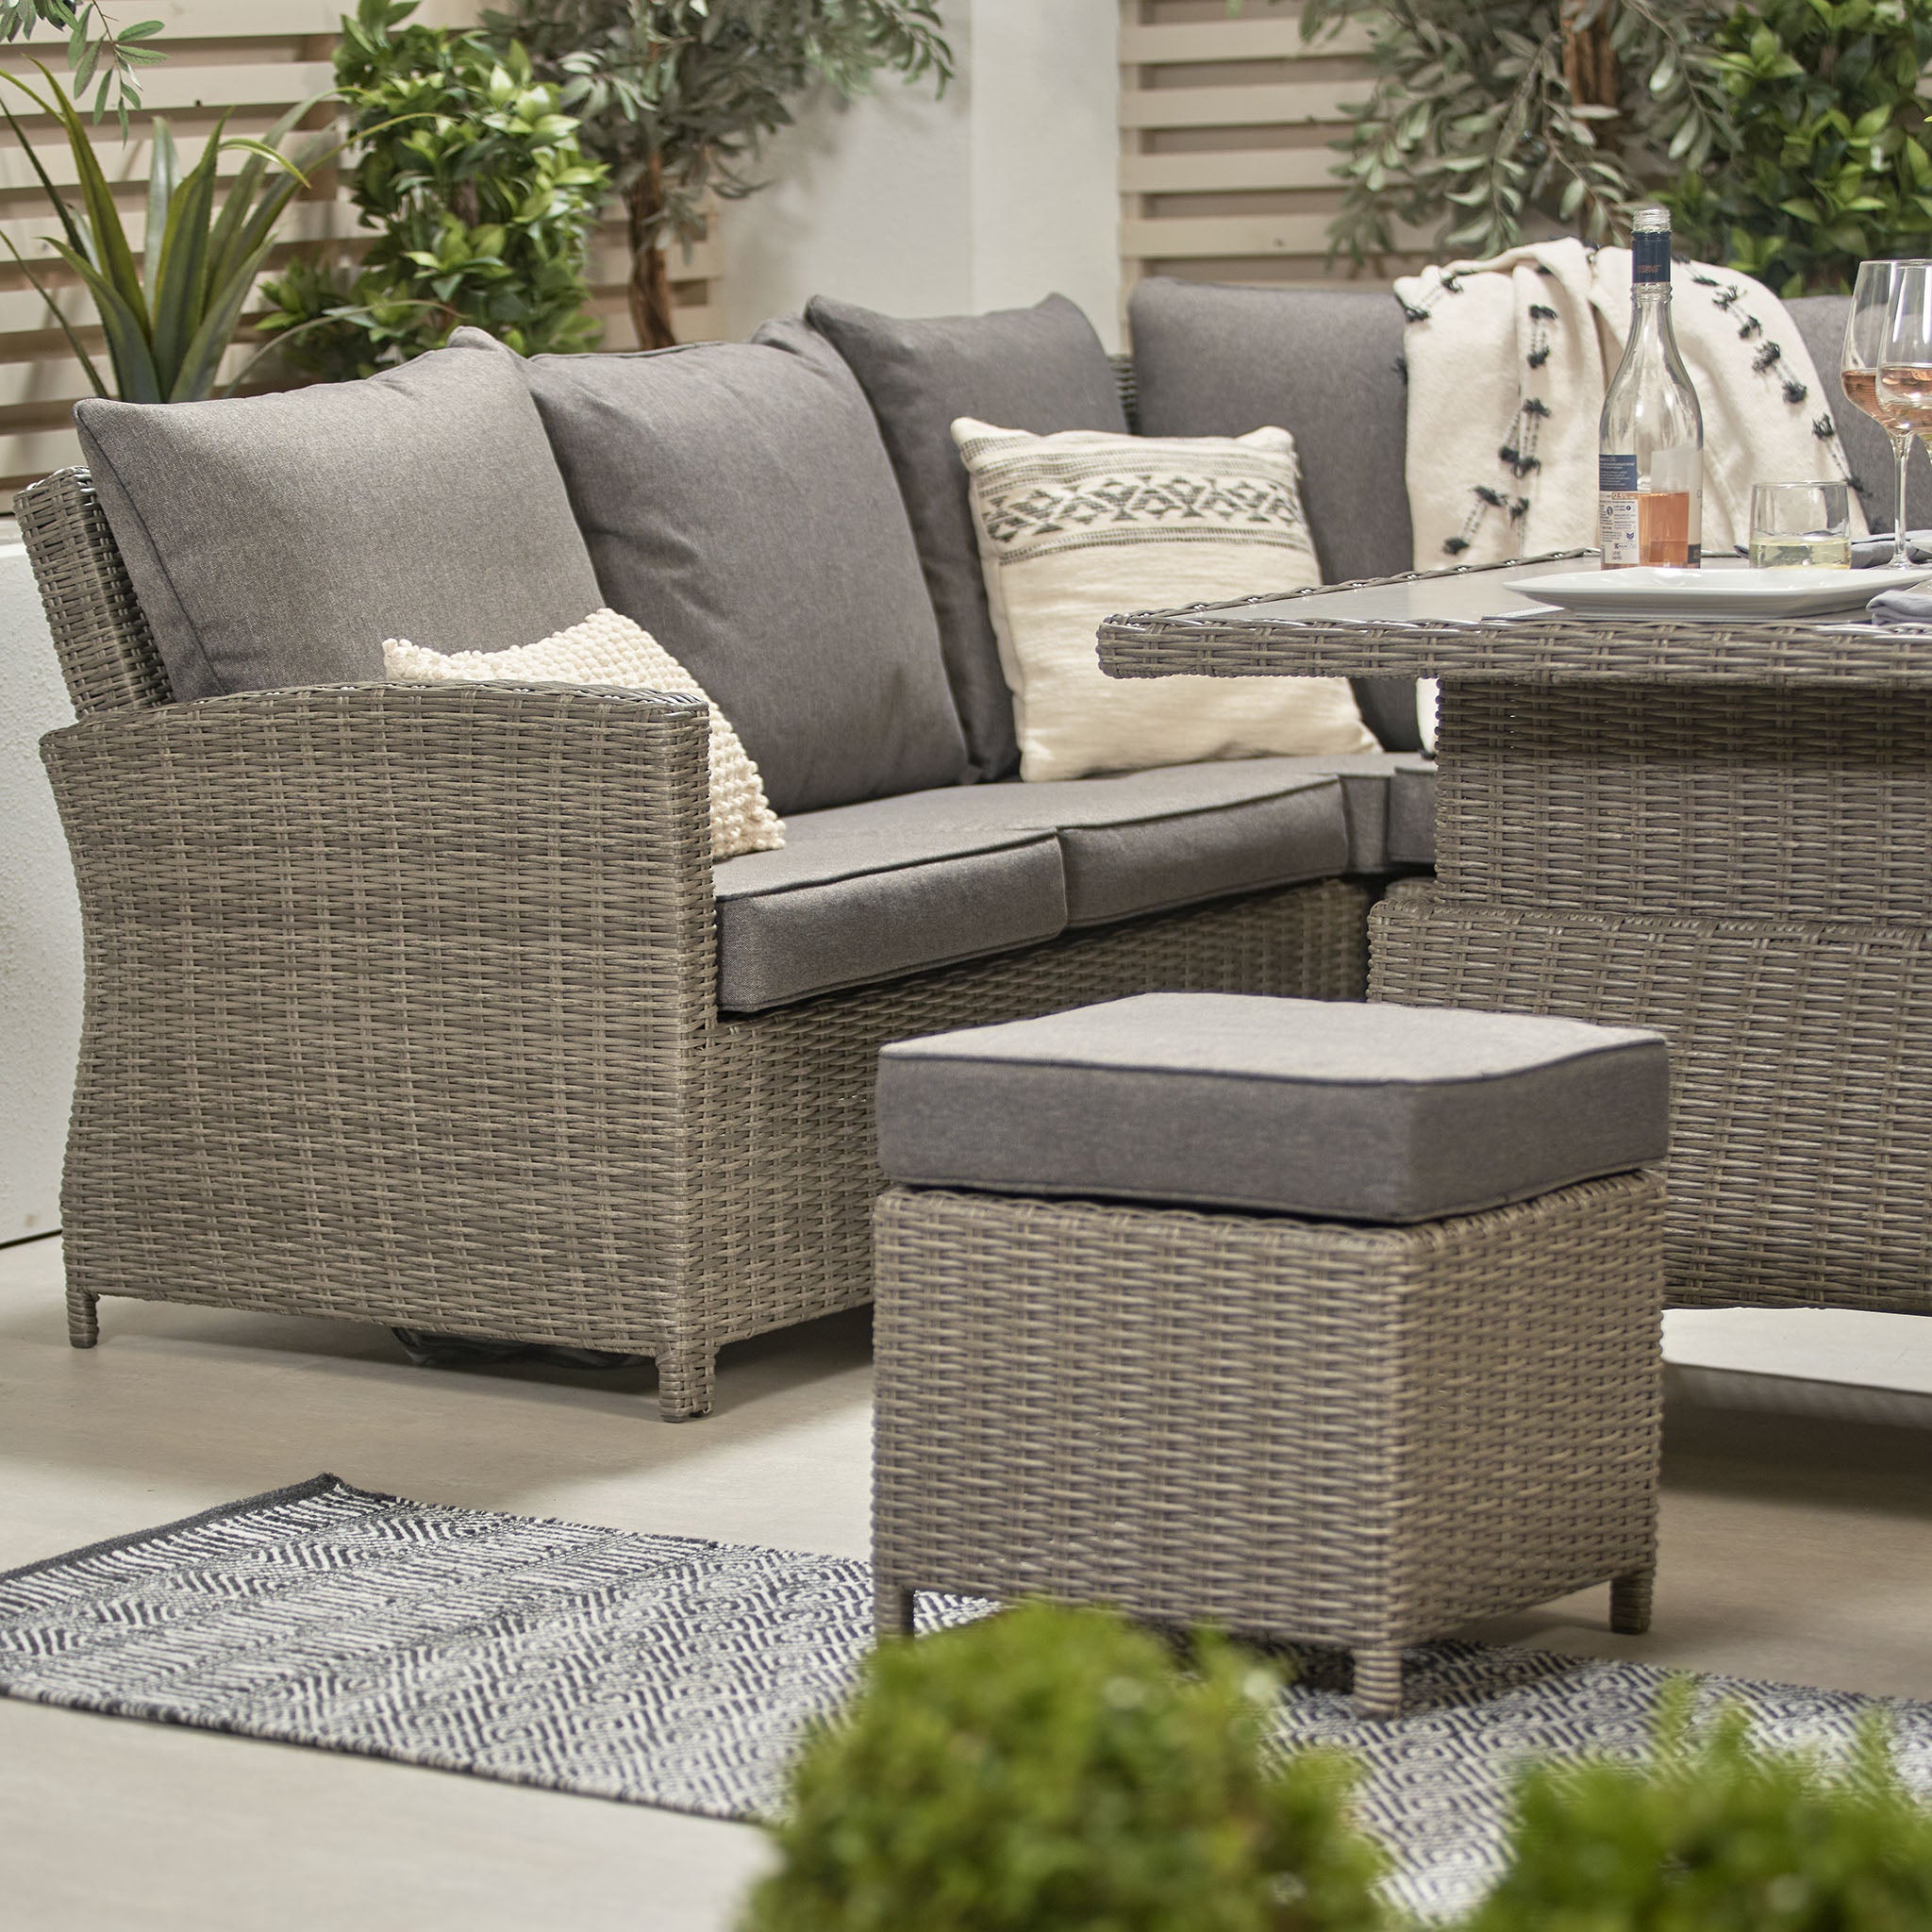 Barbados Rattan Corner Dining Set with Rising Table in Slate Grey (Left Hand)